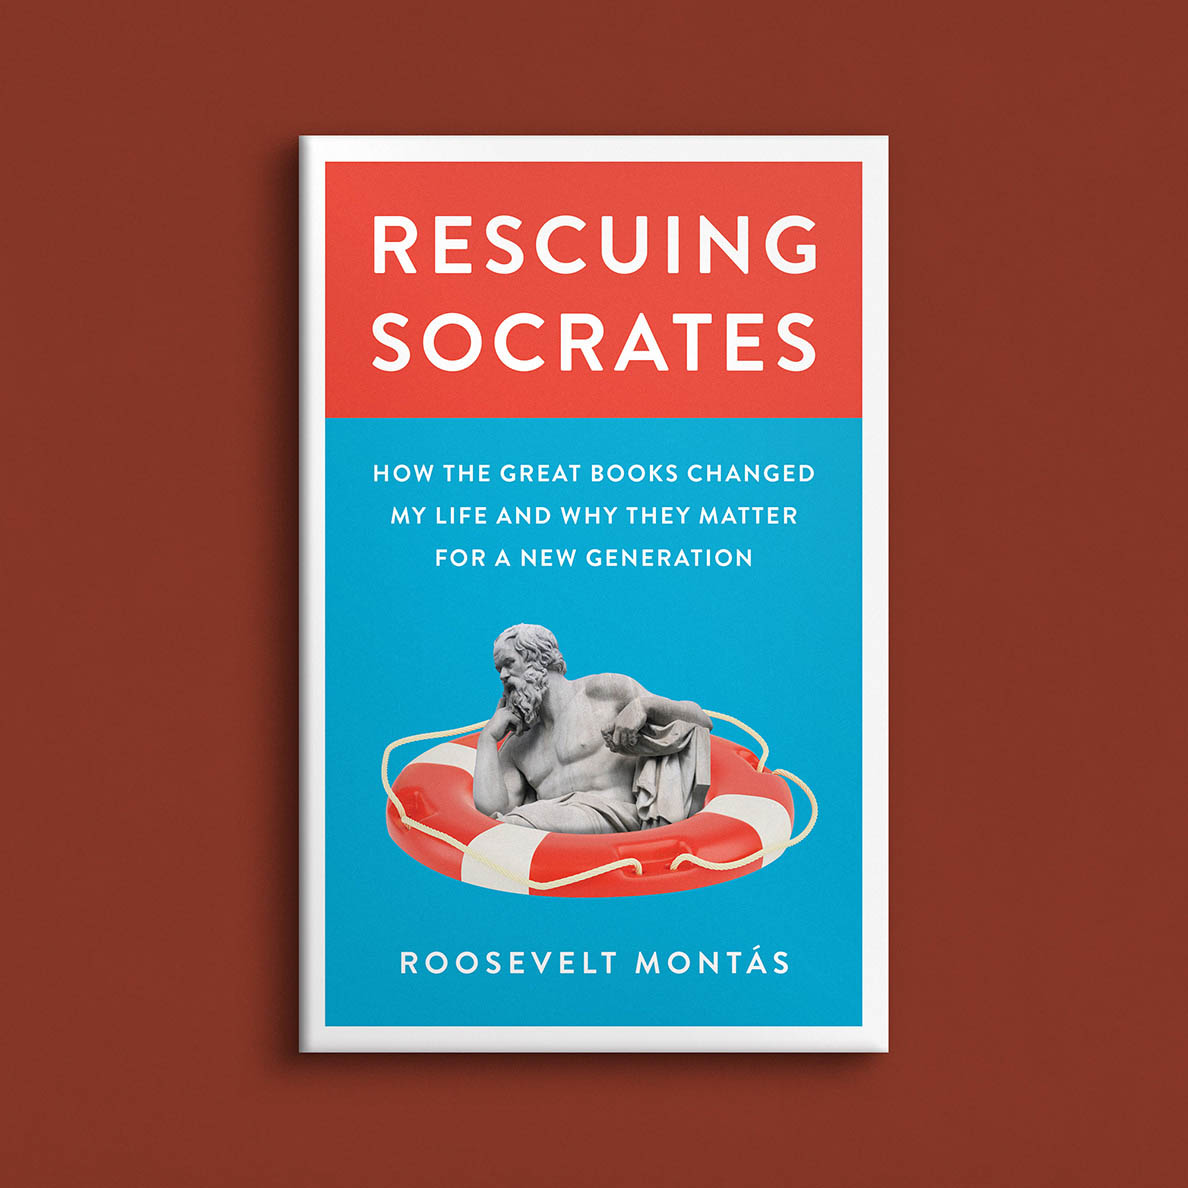 Rescuing Socrates book cover